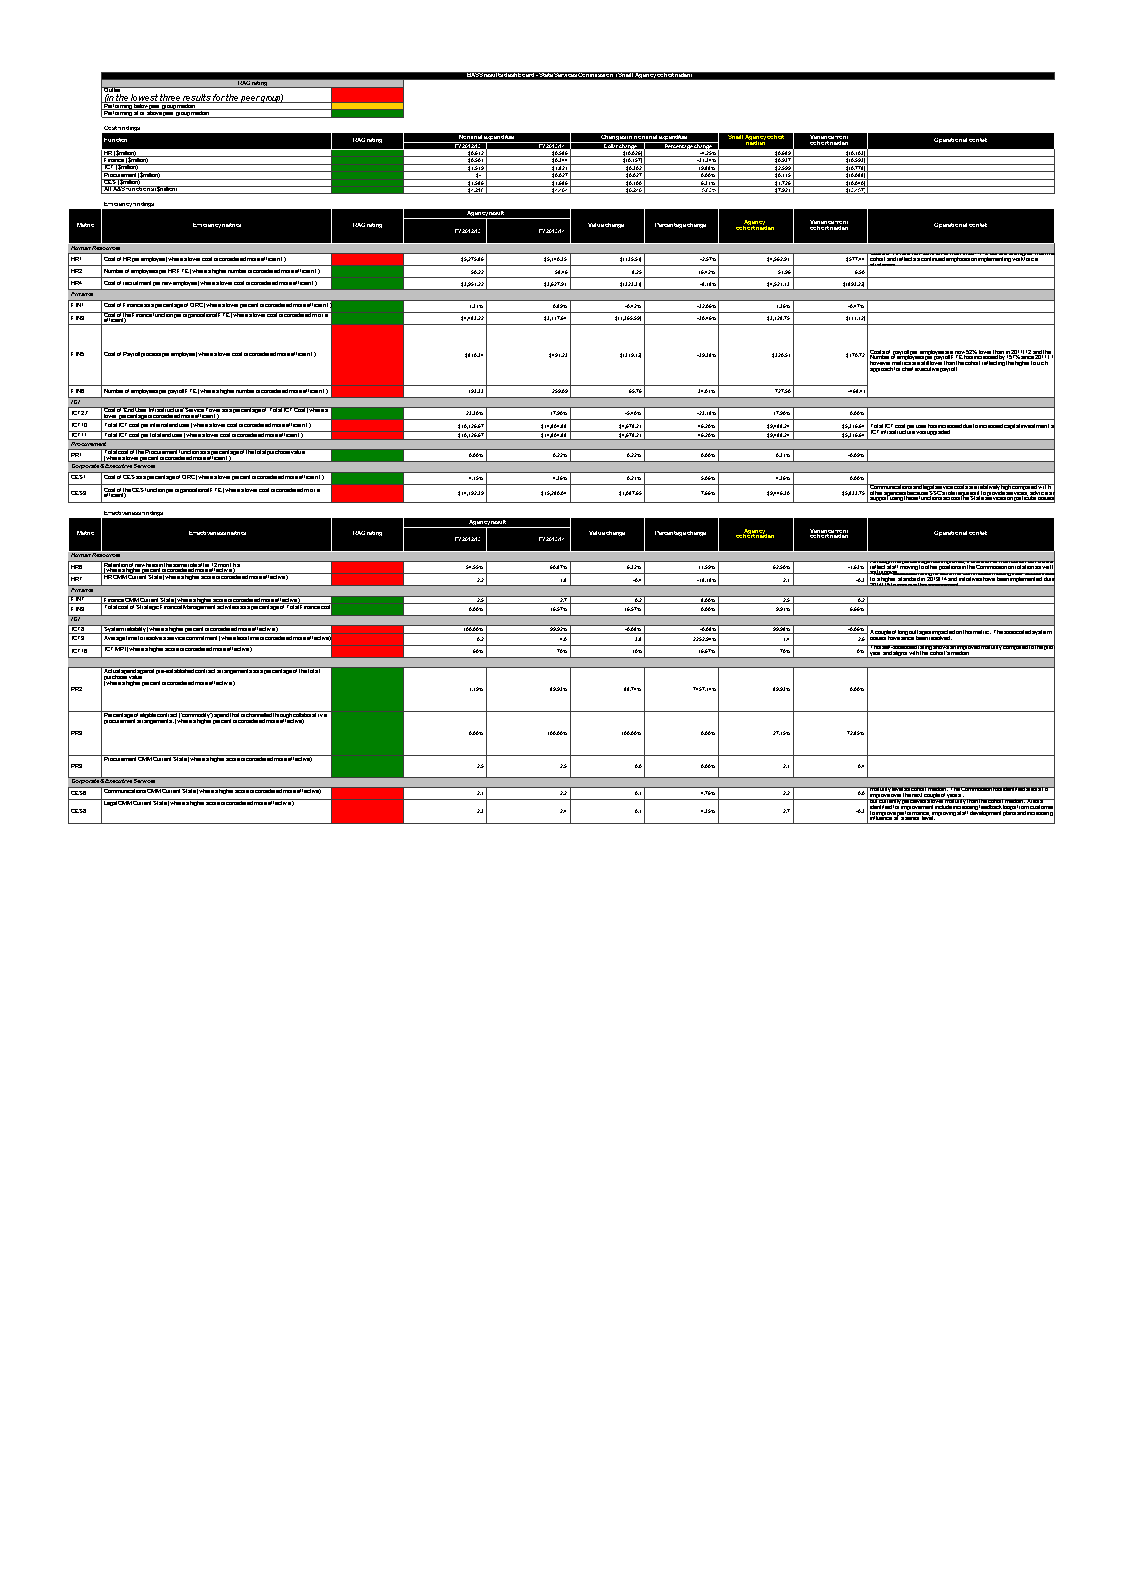 Excel Dashboard Report main image